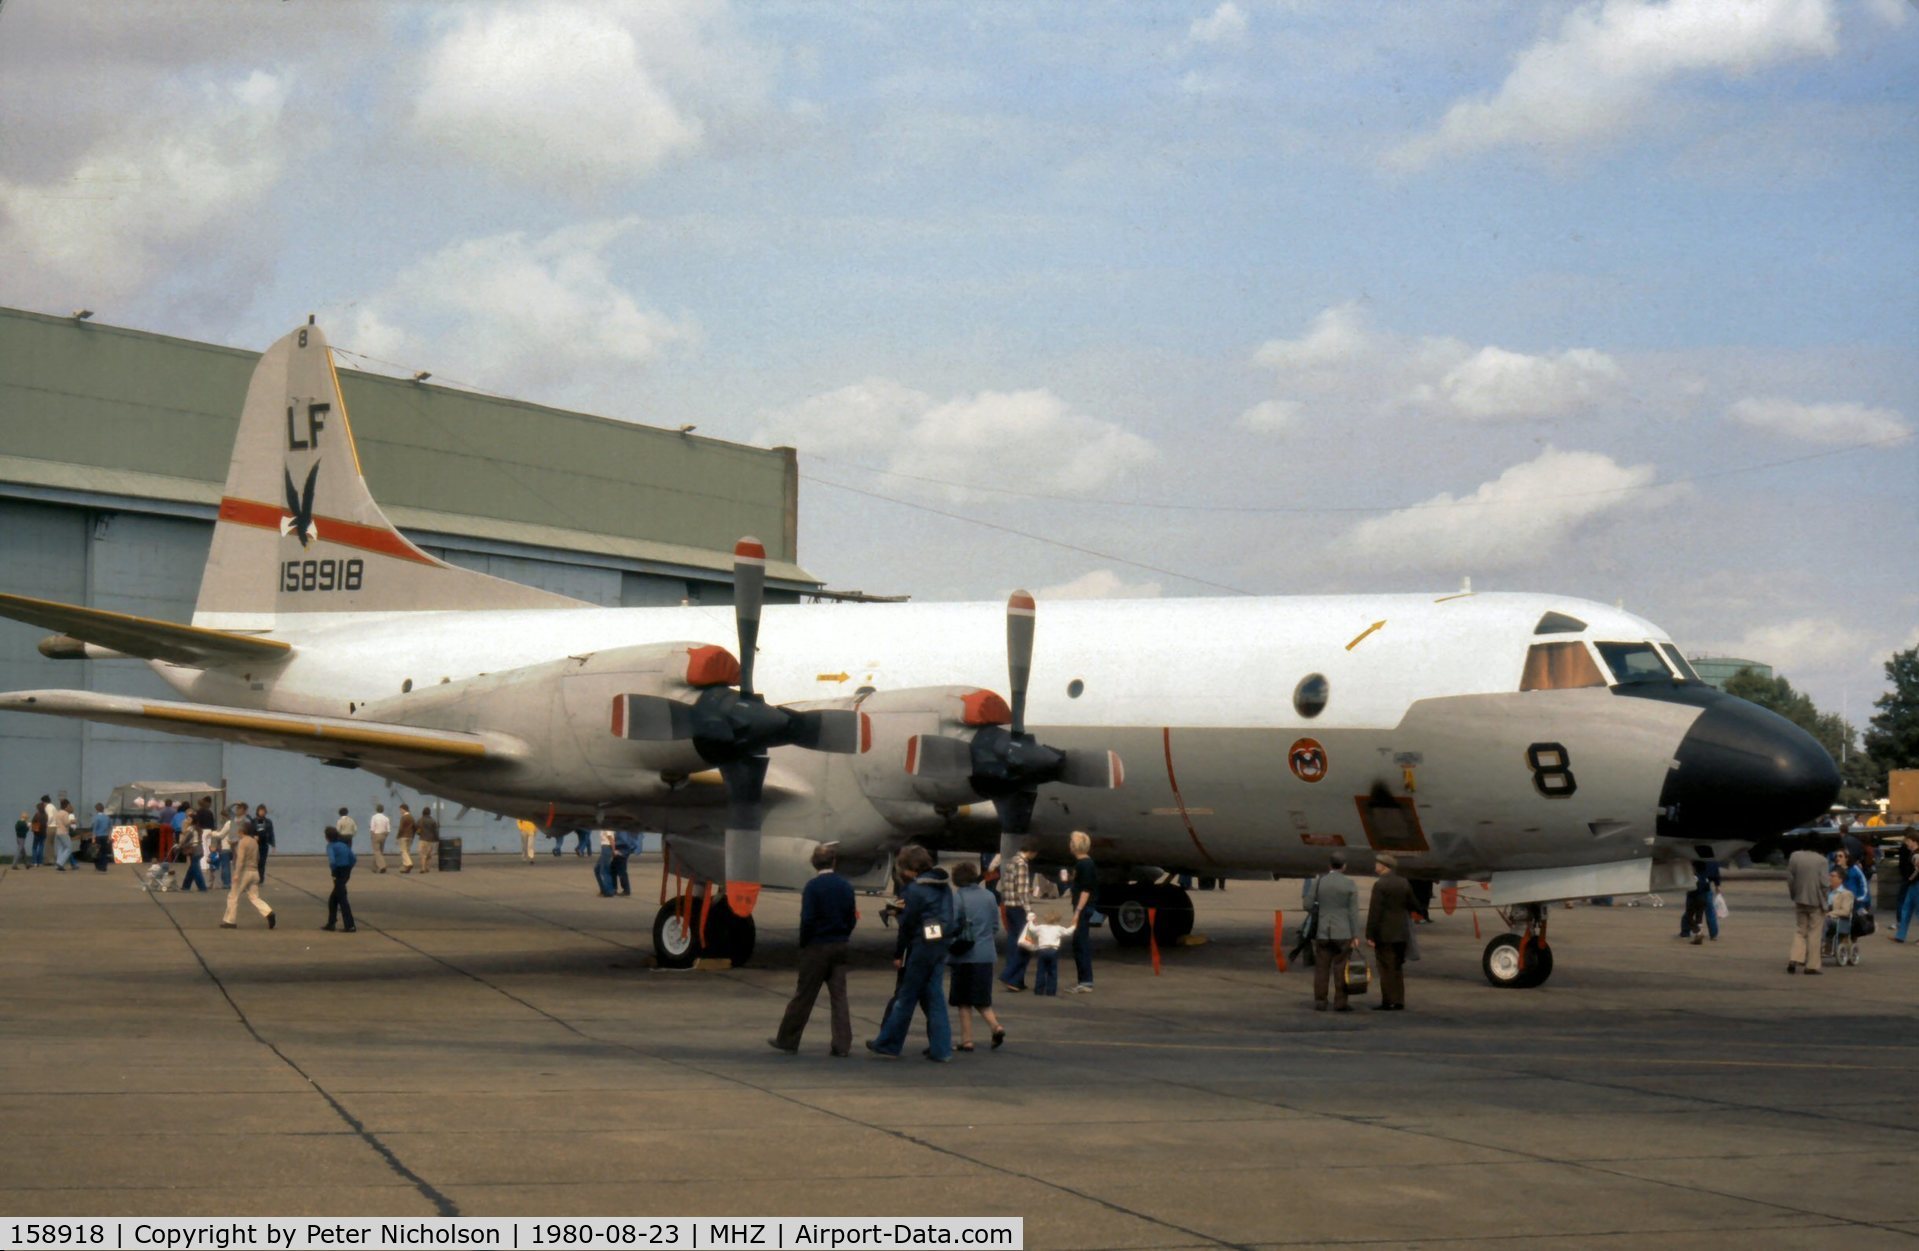 158918, Lockheed P-3C Orion C/N 285A-5590, P-3C Orion of Patrol Squadron VP-16 on display at the 1980 Mildenhall Air Fete.